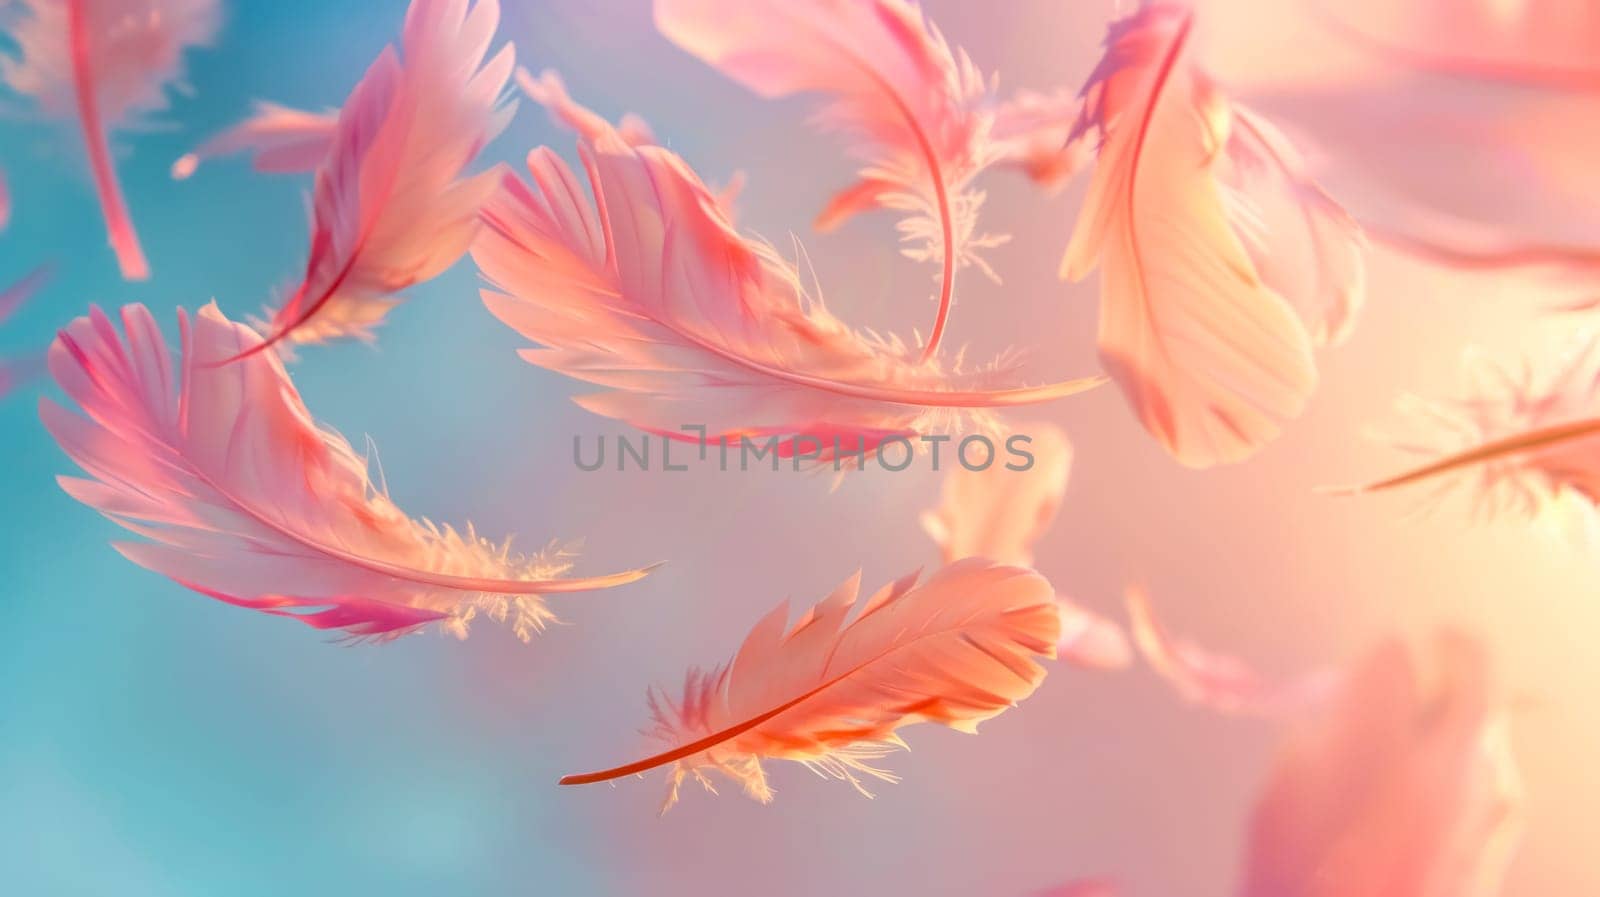 Soft-focus feathers gently drift in a serene pastel-colored background